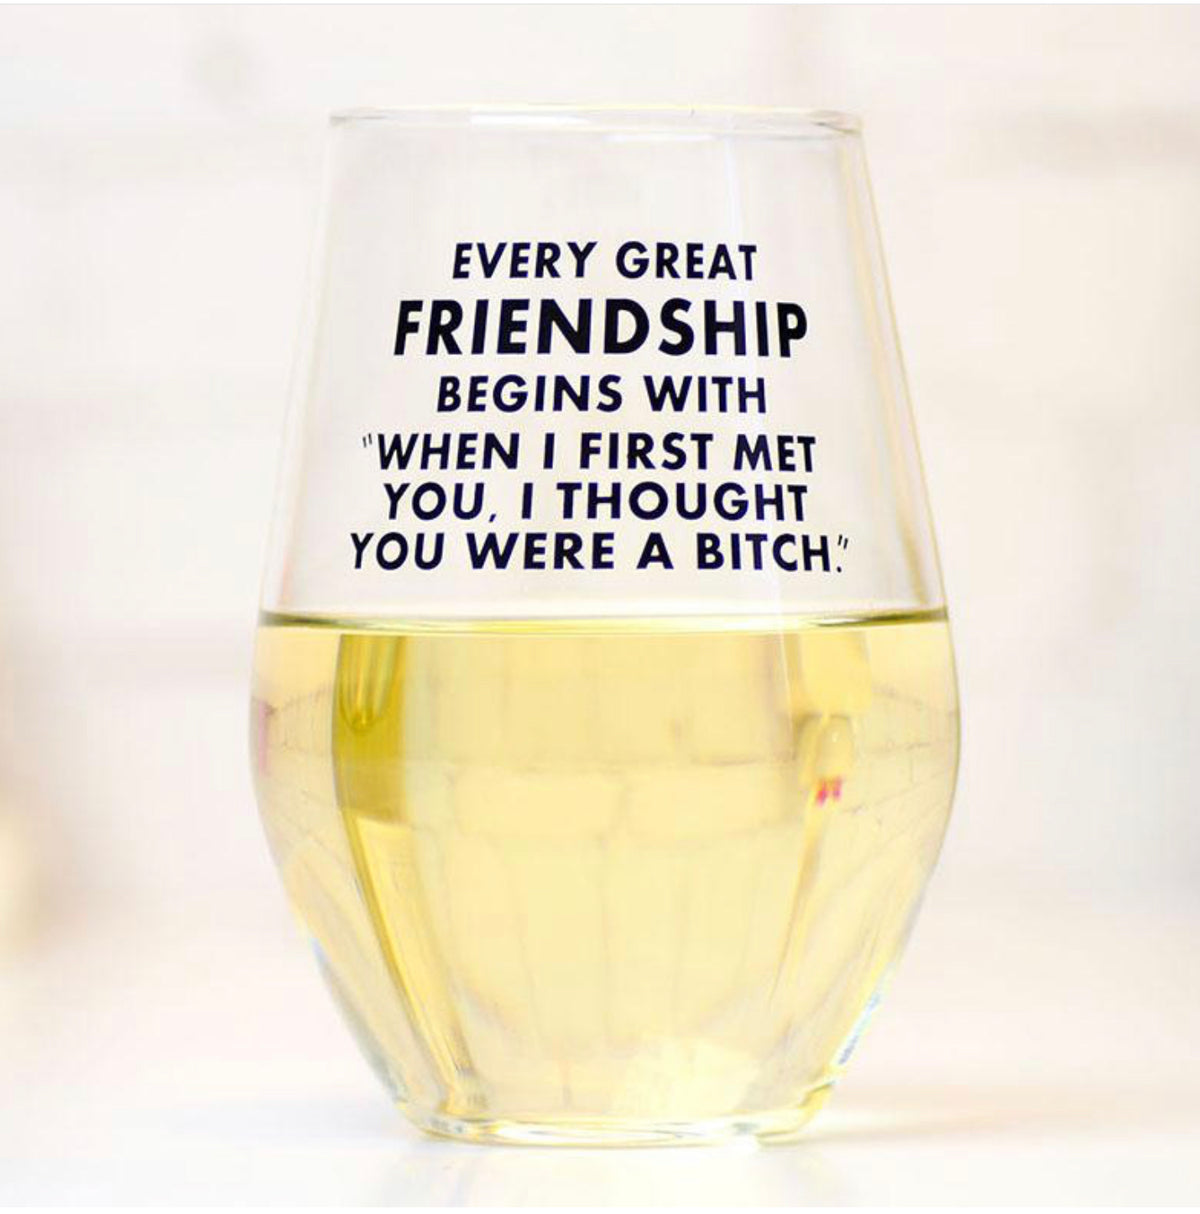 Every great friendship begins with "When we first met I thought you were a total bitch." Wine Glass